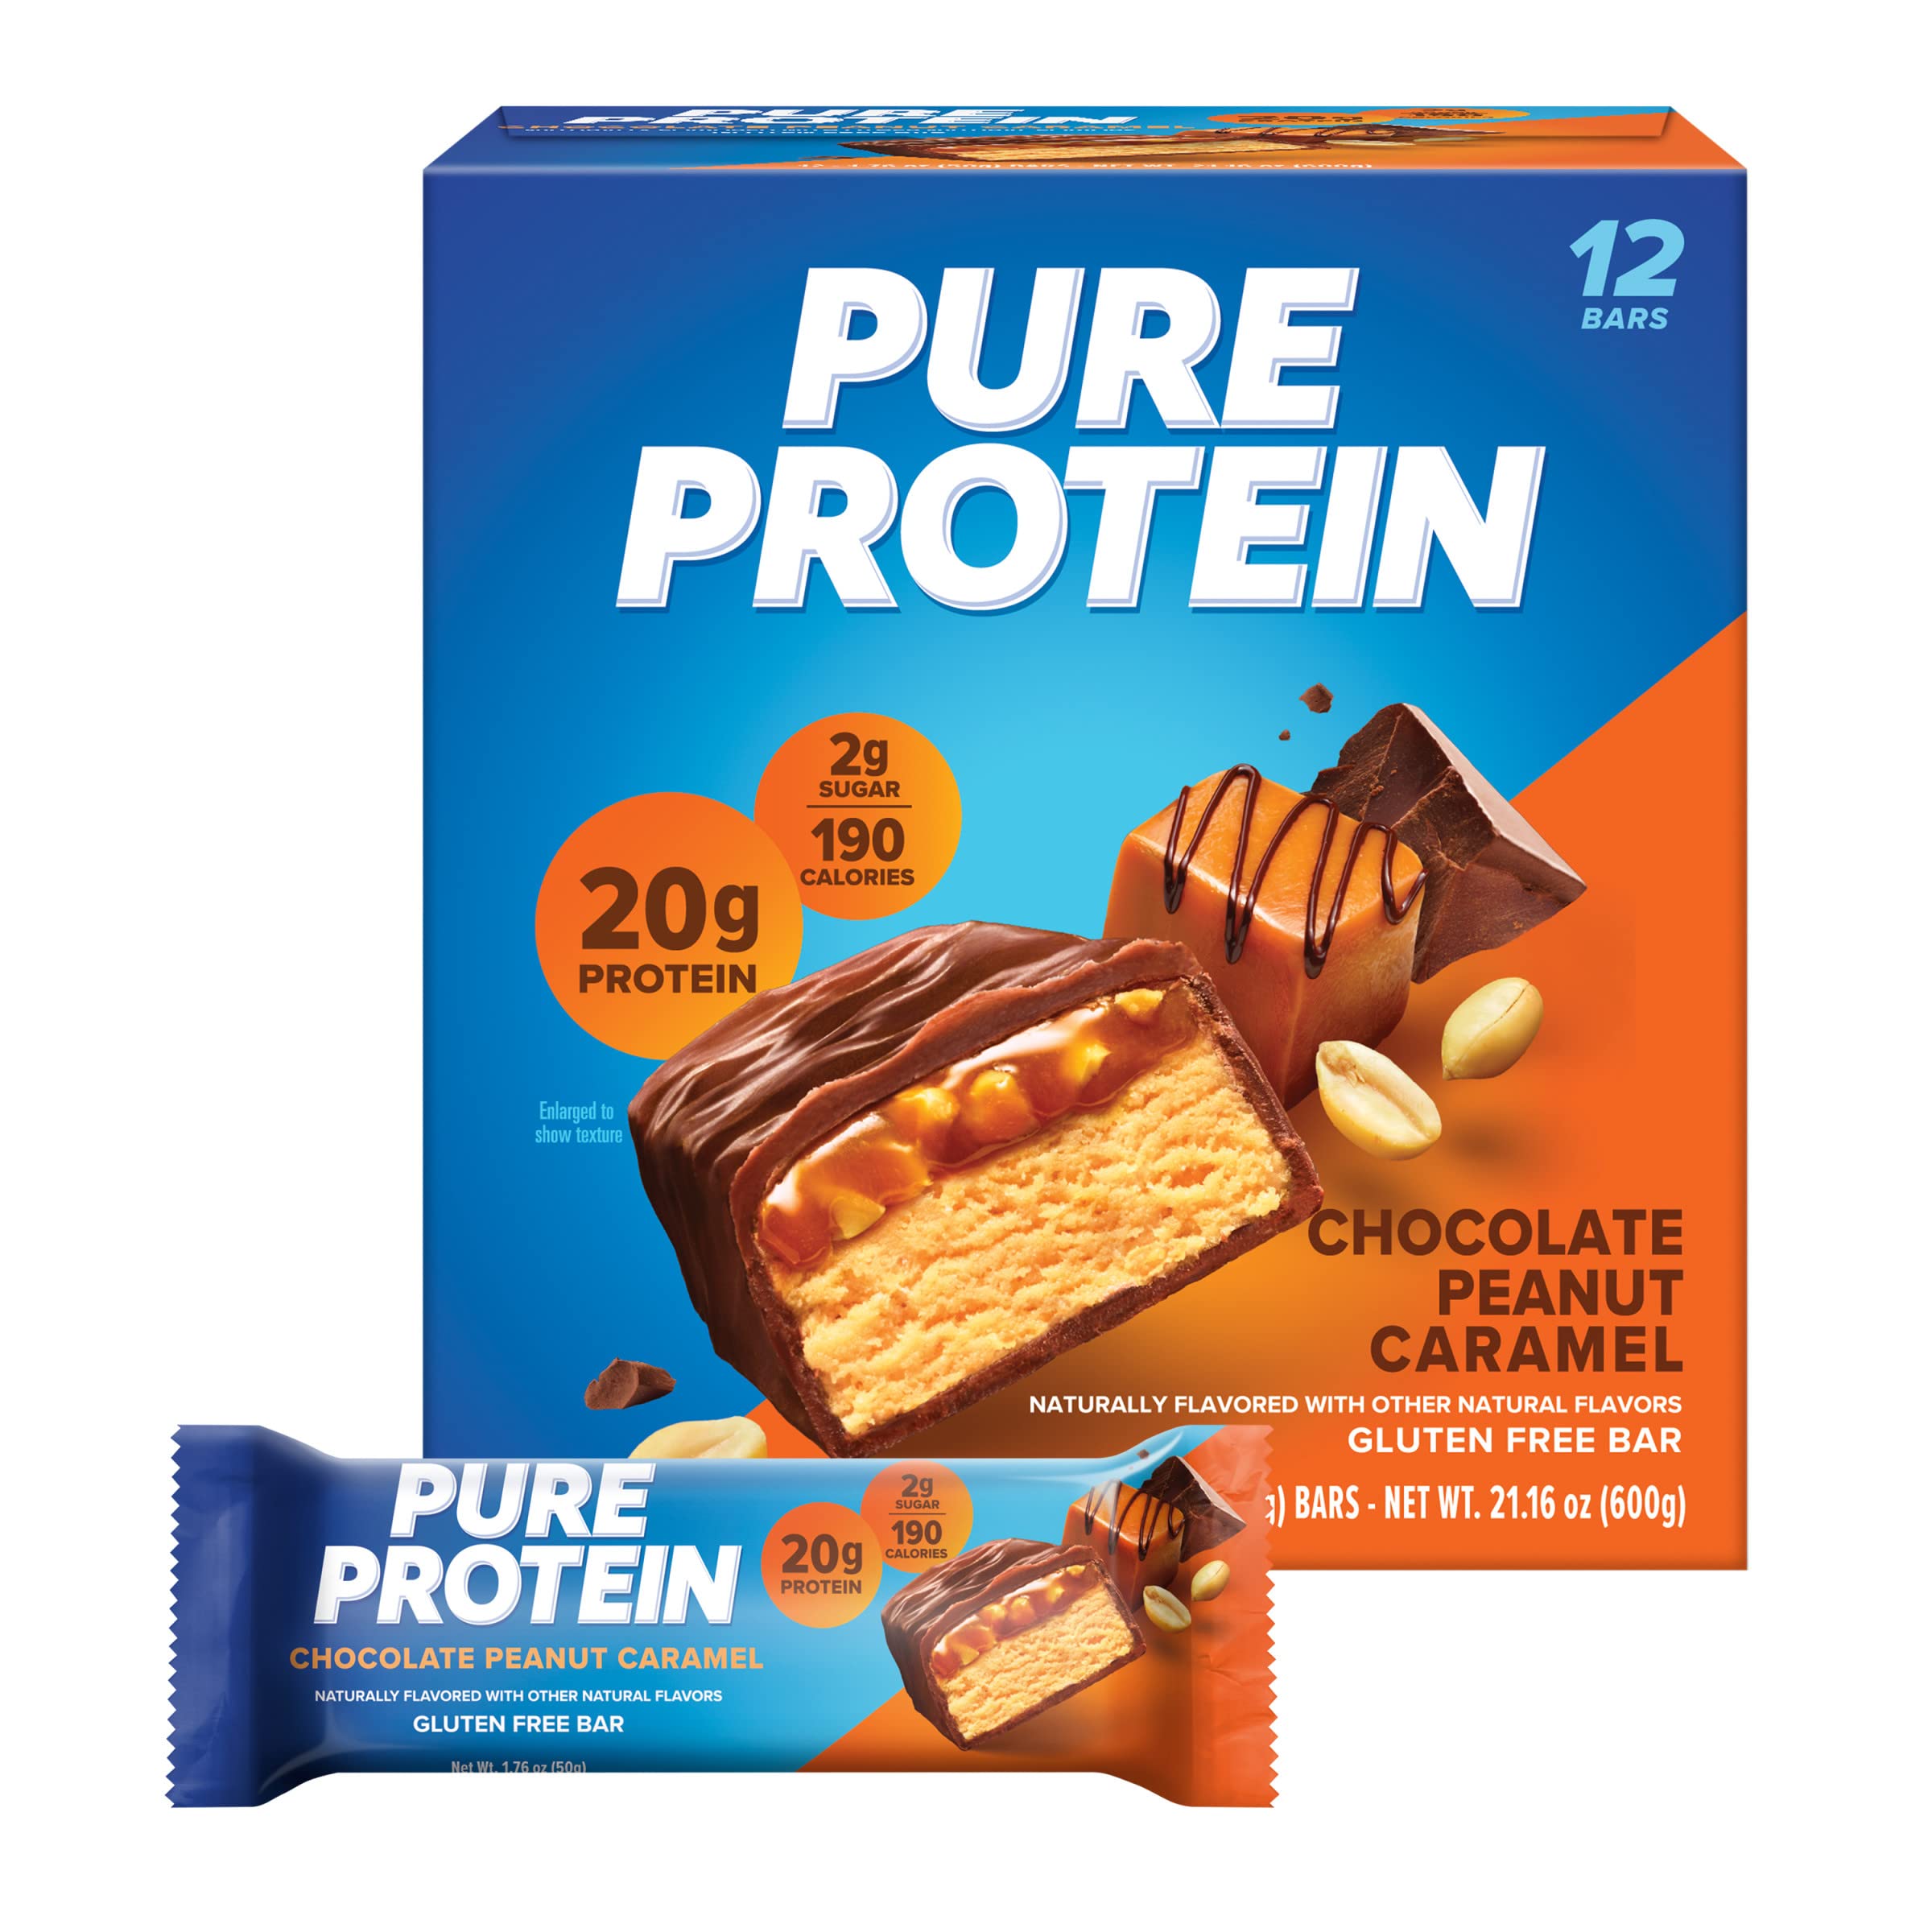 Pure Protein Bars, High Protein, Nutritious Snacks to Support Energy, Low Sugar, Chocolate Peanut Caramel, 1.76oz, 12 Pack, $11.19 w S&S Amazon